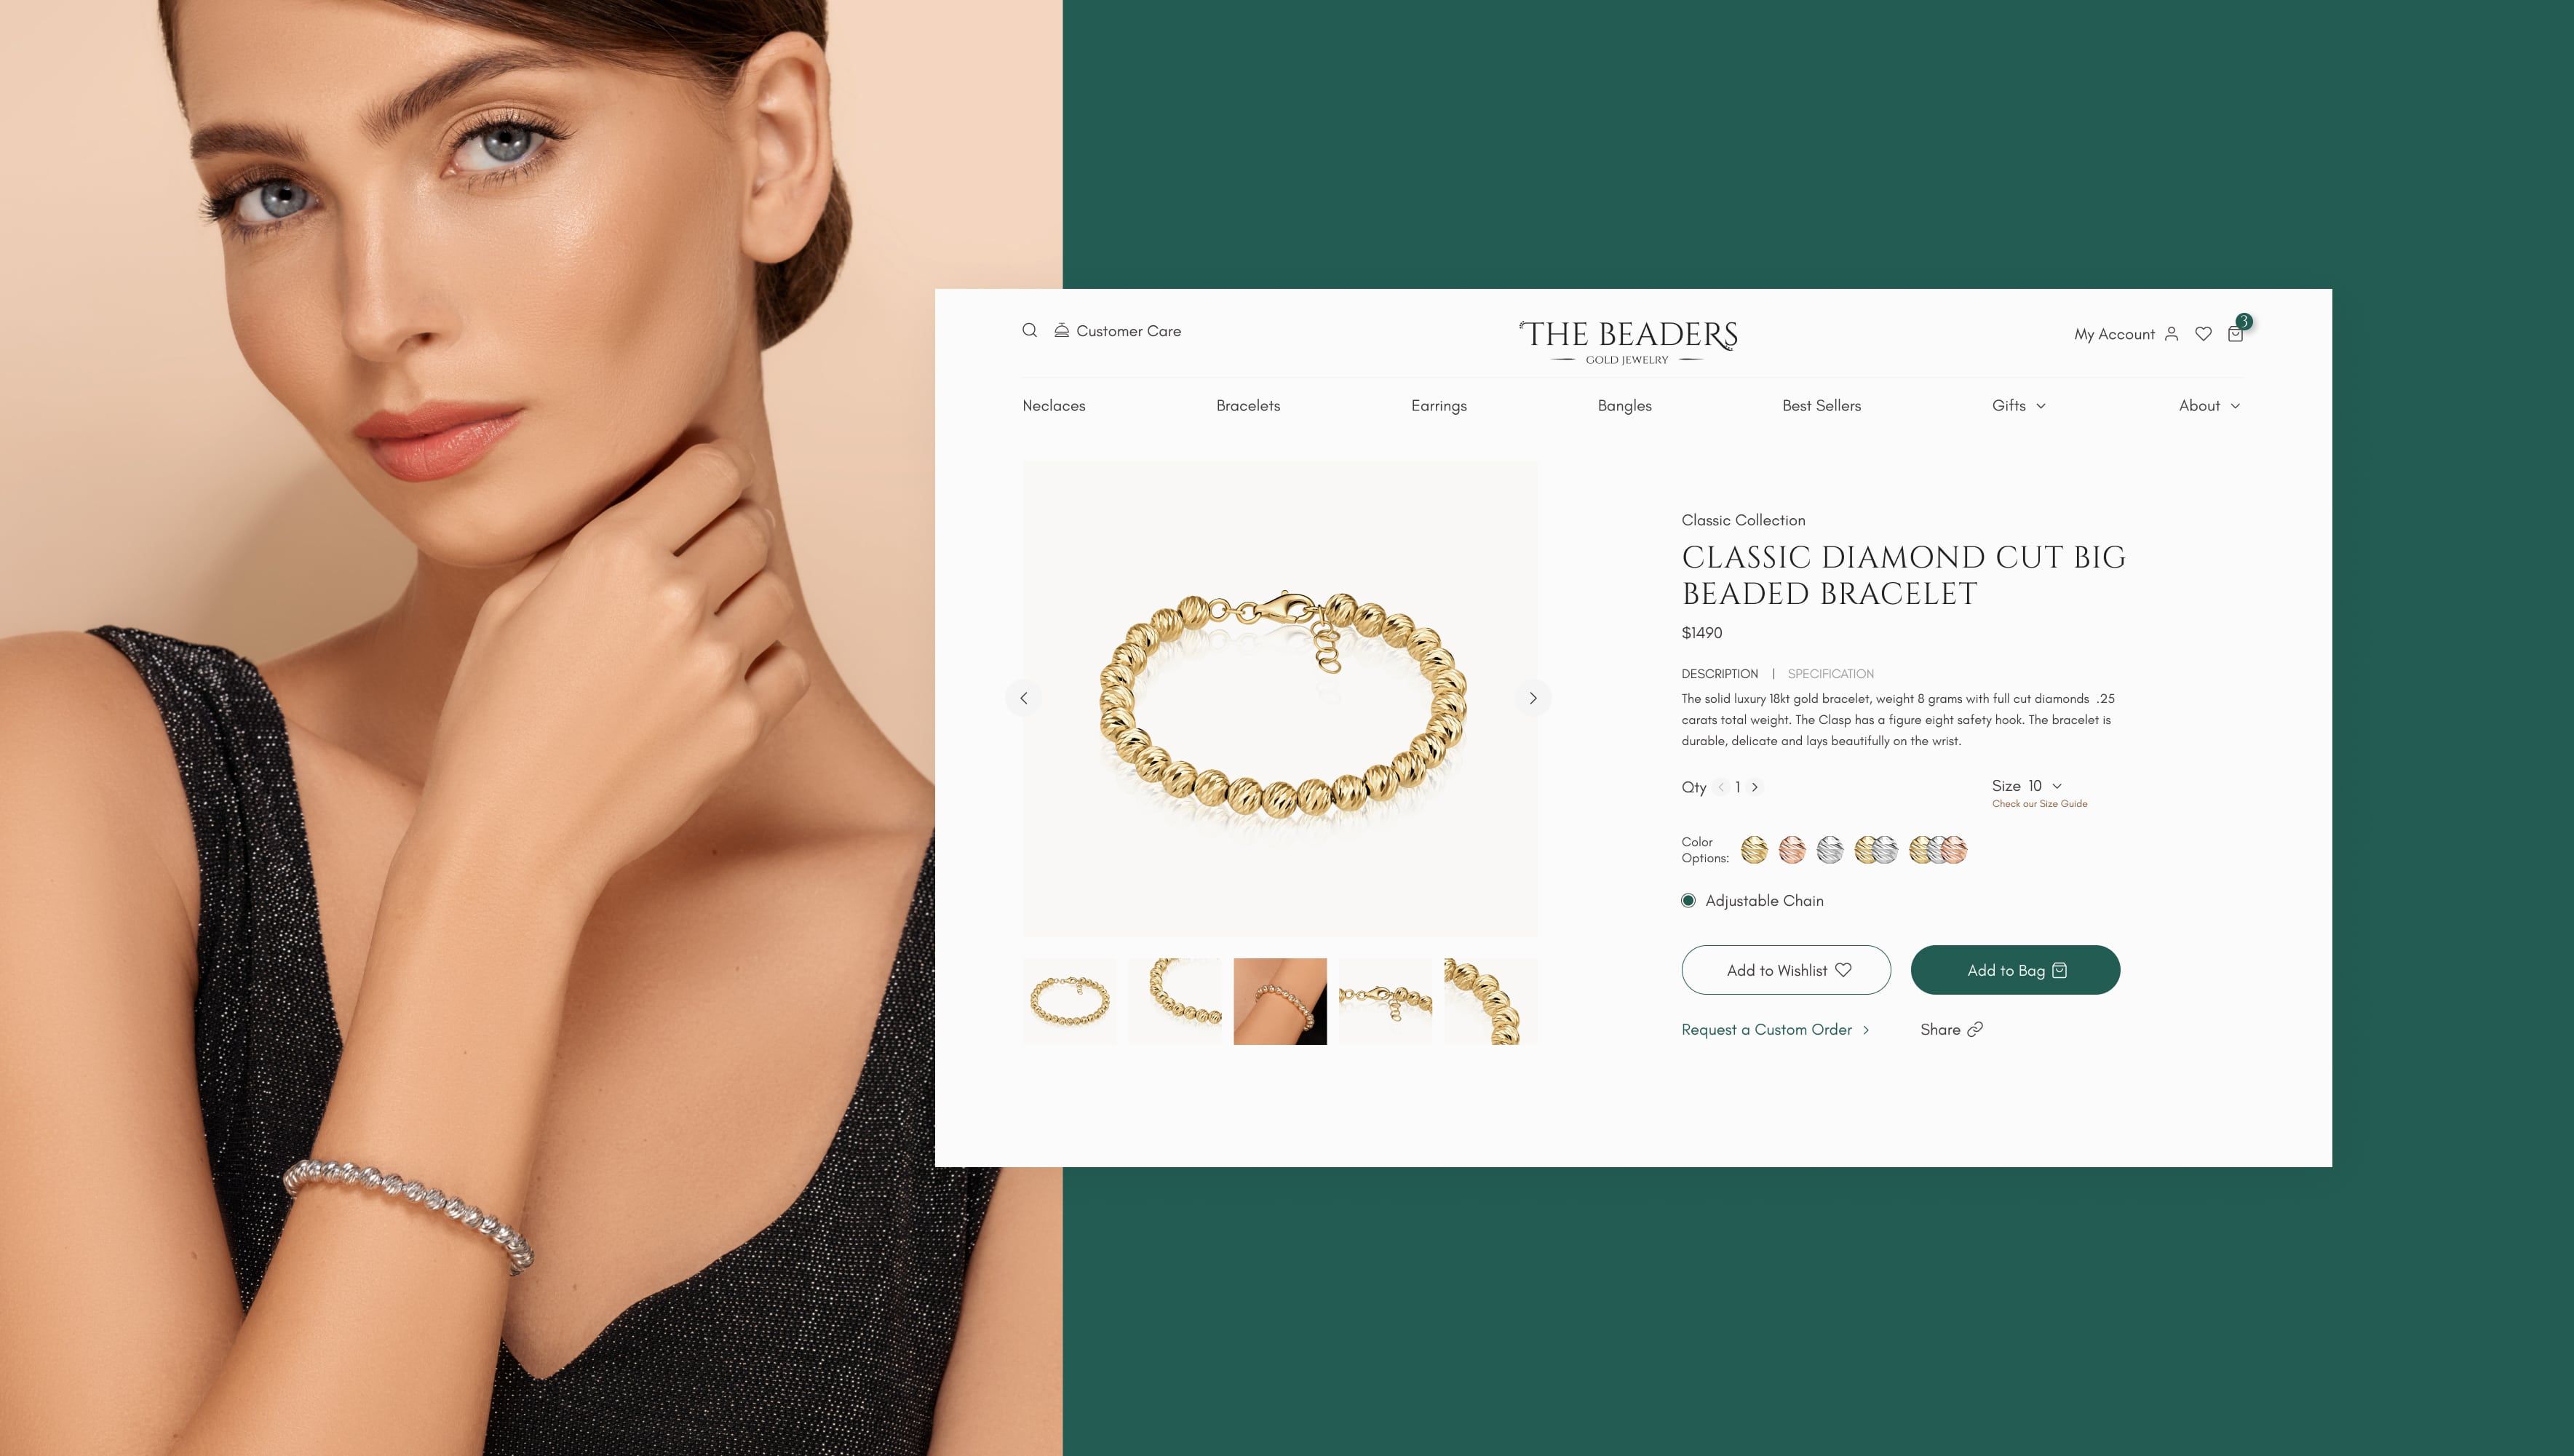 The Beaders product page banner next to the Model presenting the product